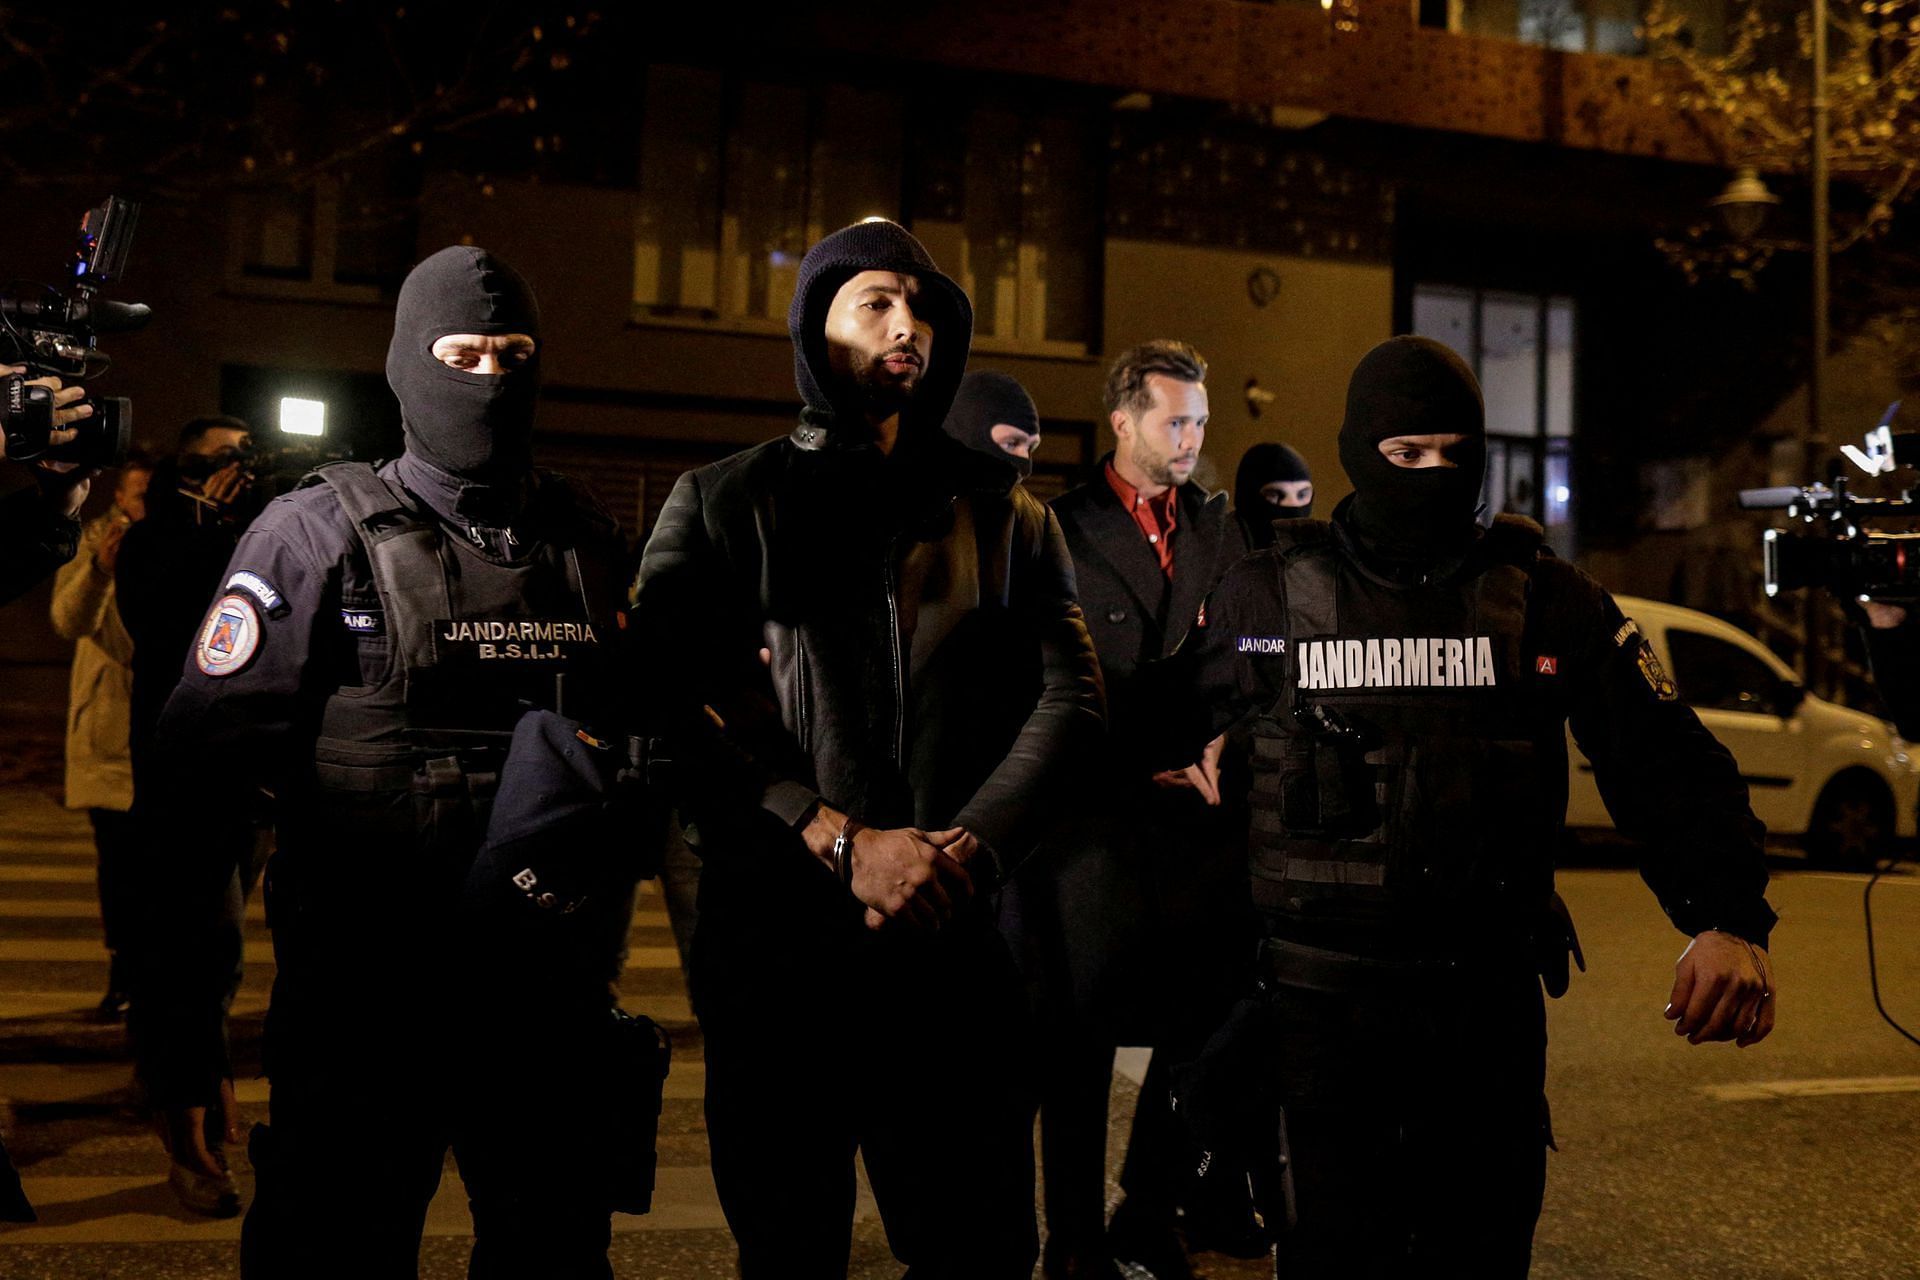 Andrew and Tristan Tate escorted by police officers in Romania (Image via Octav Ganea/Reuters)